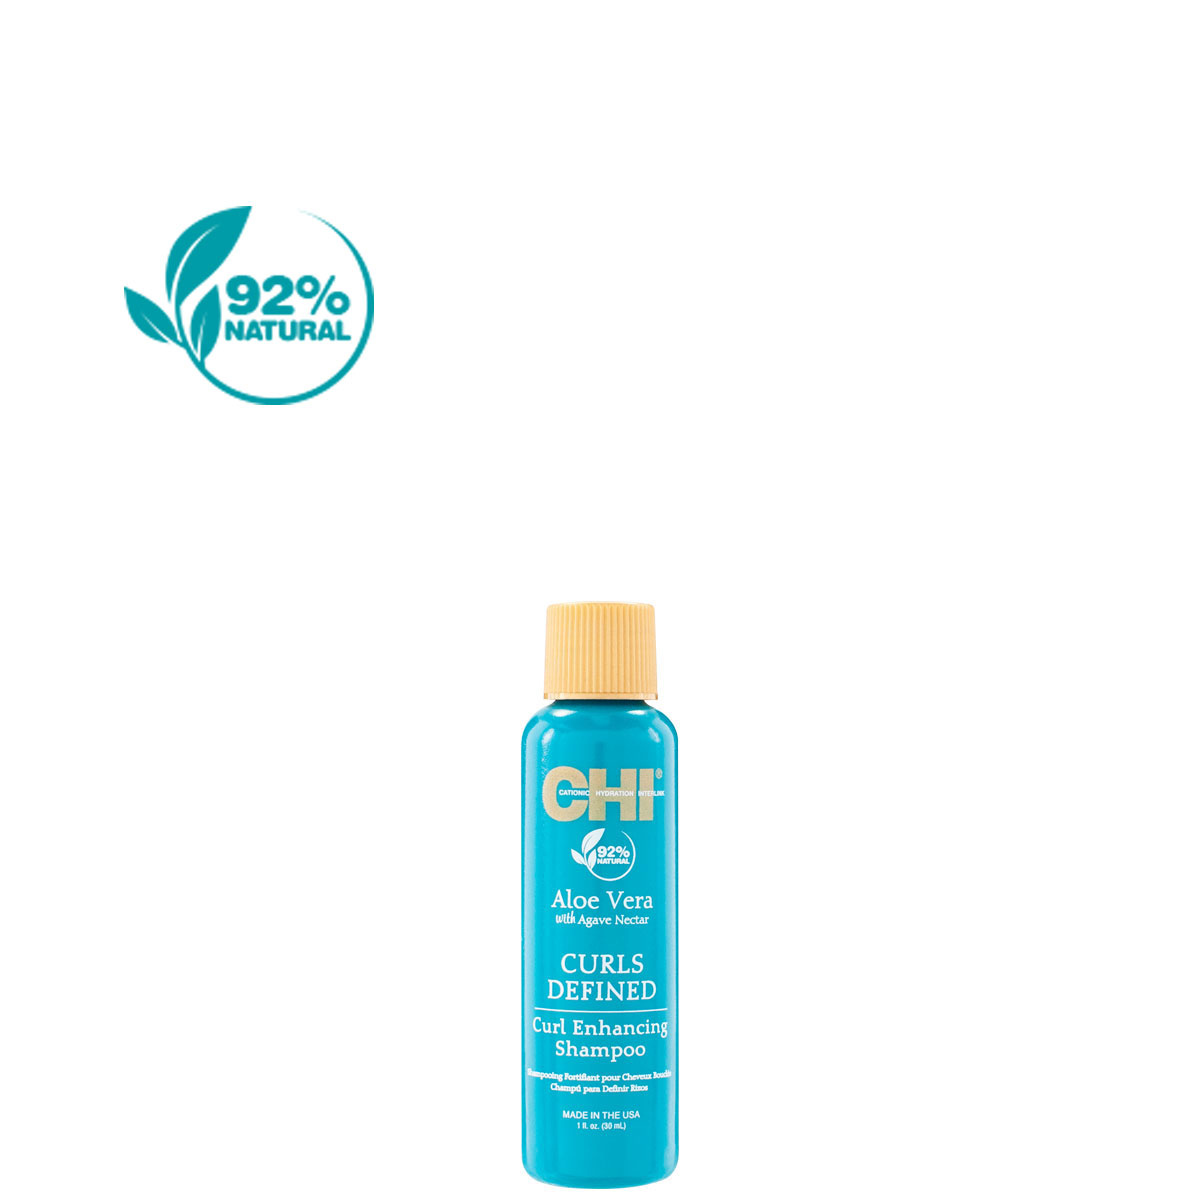 CHI Aloe Vera With Agave Nectar Curl Enhancing Shampoo - 30ml -  vrouwen - Voor